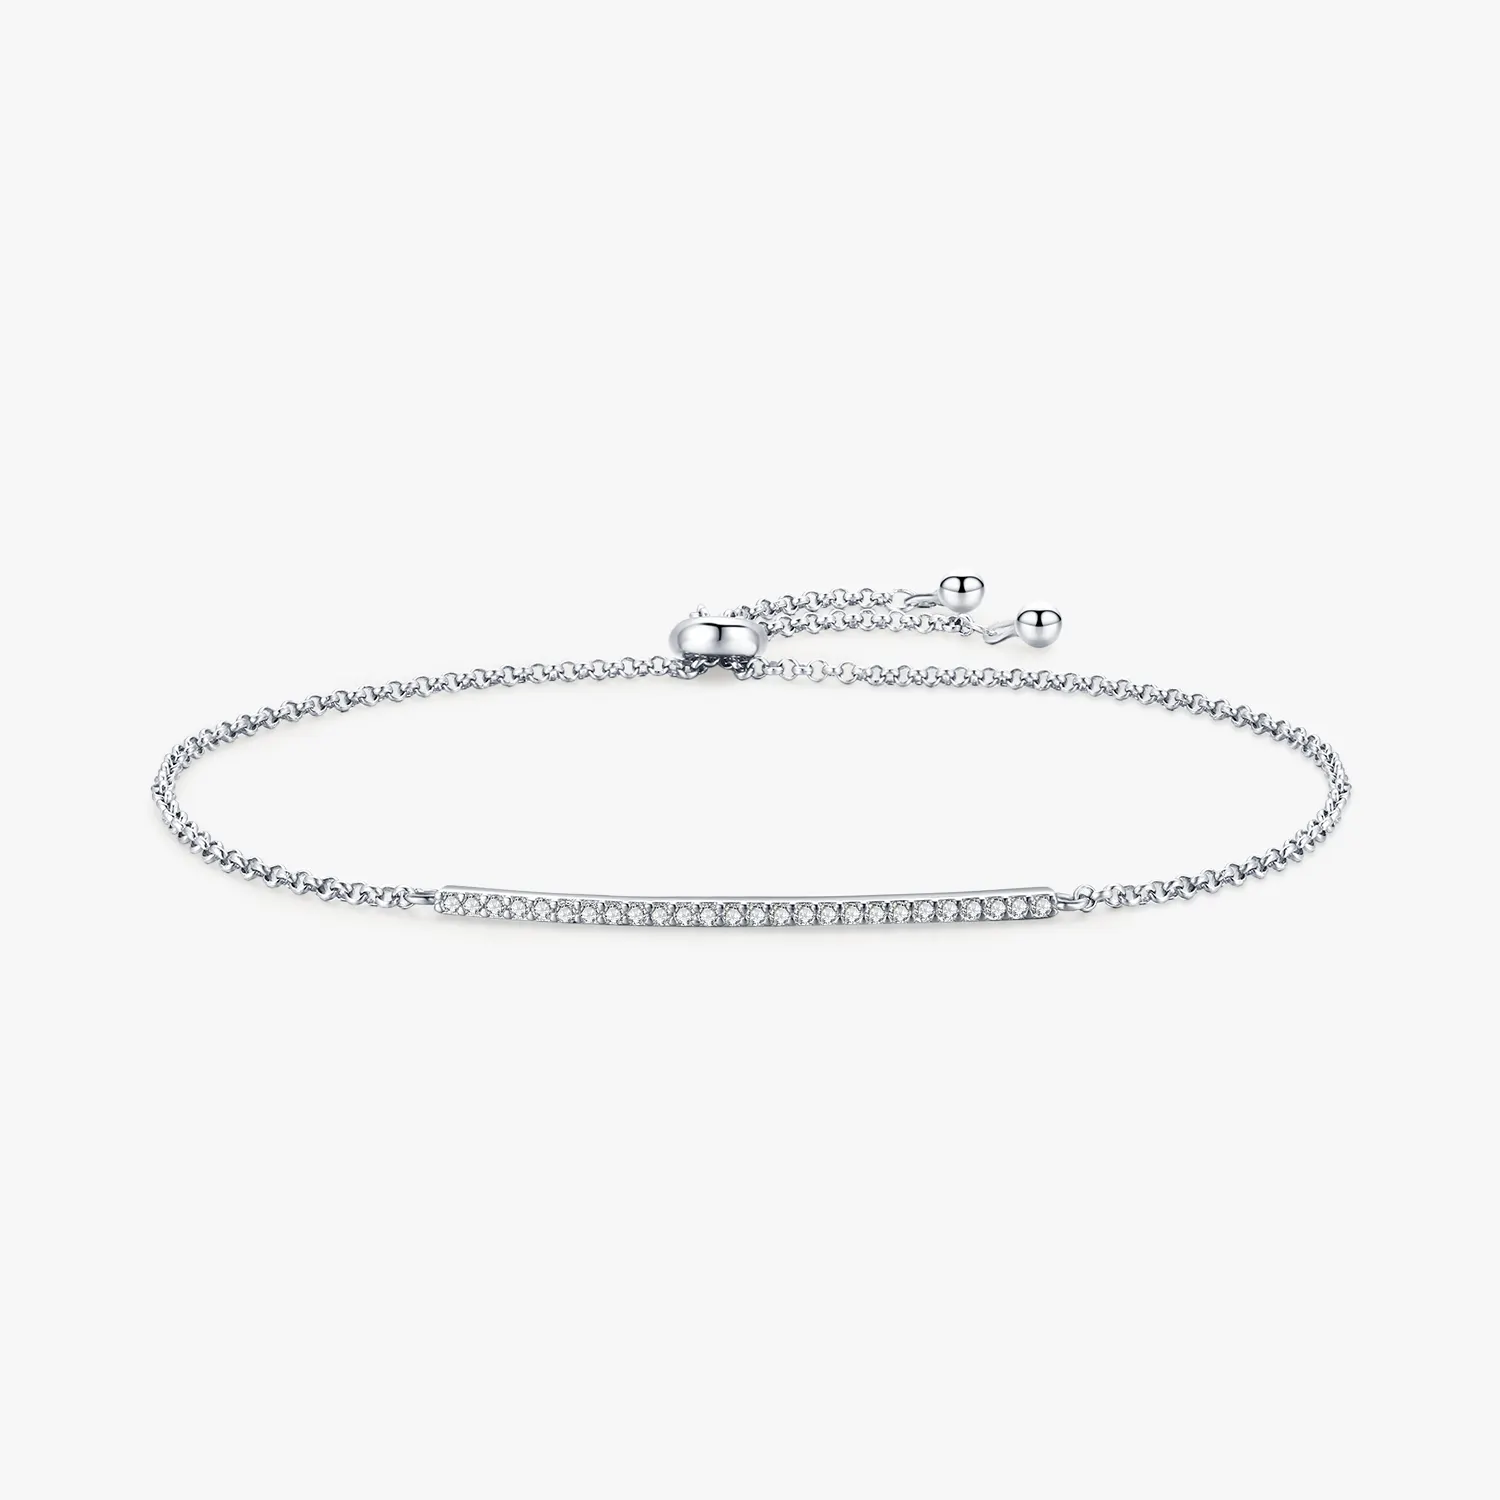 Real 925 Sterling Silver Classic Dazzling Cubic Zirconia Adjustable Link Chain Bracelet For Women Elegant Wedding Jewelry